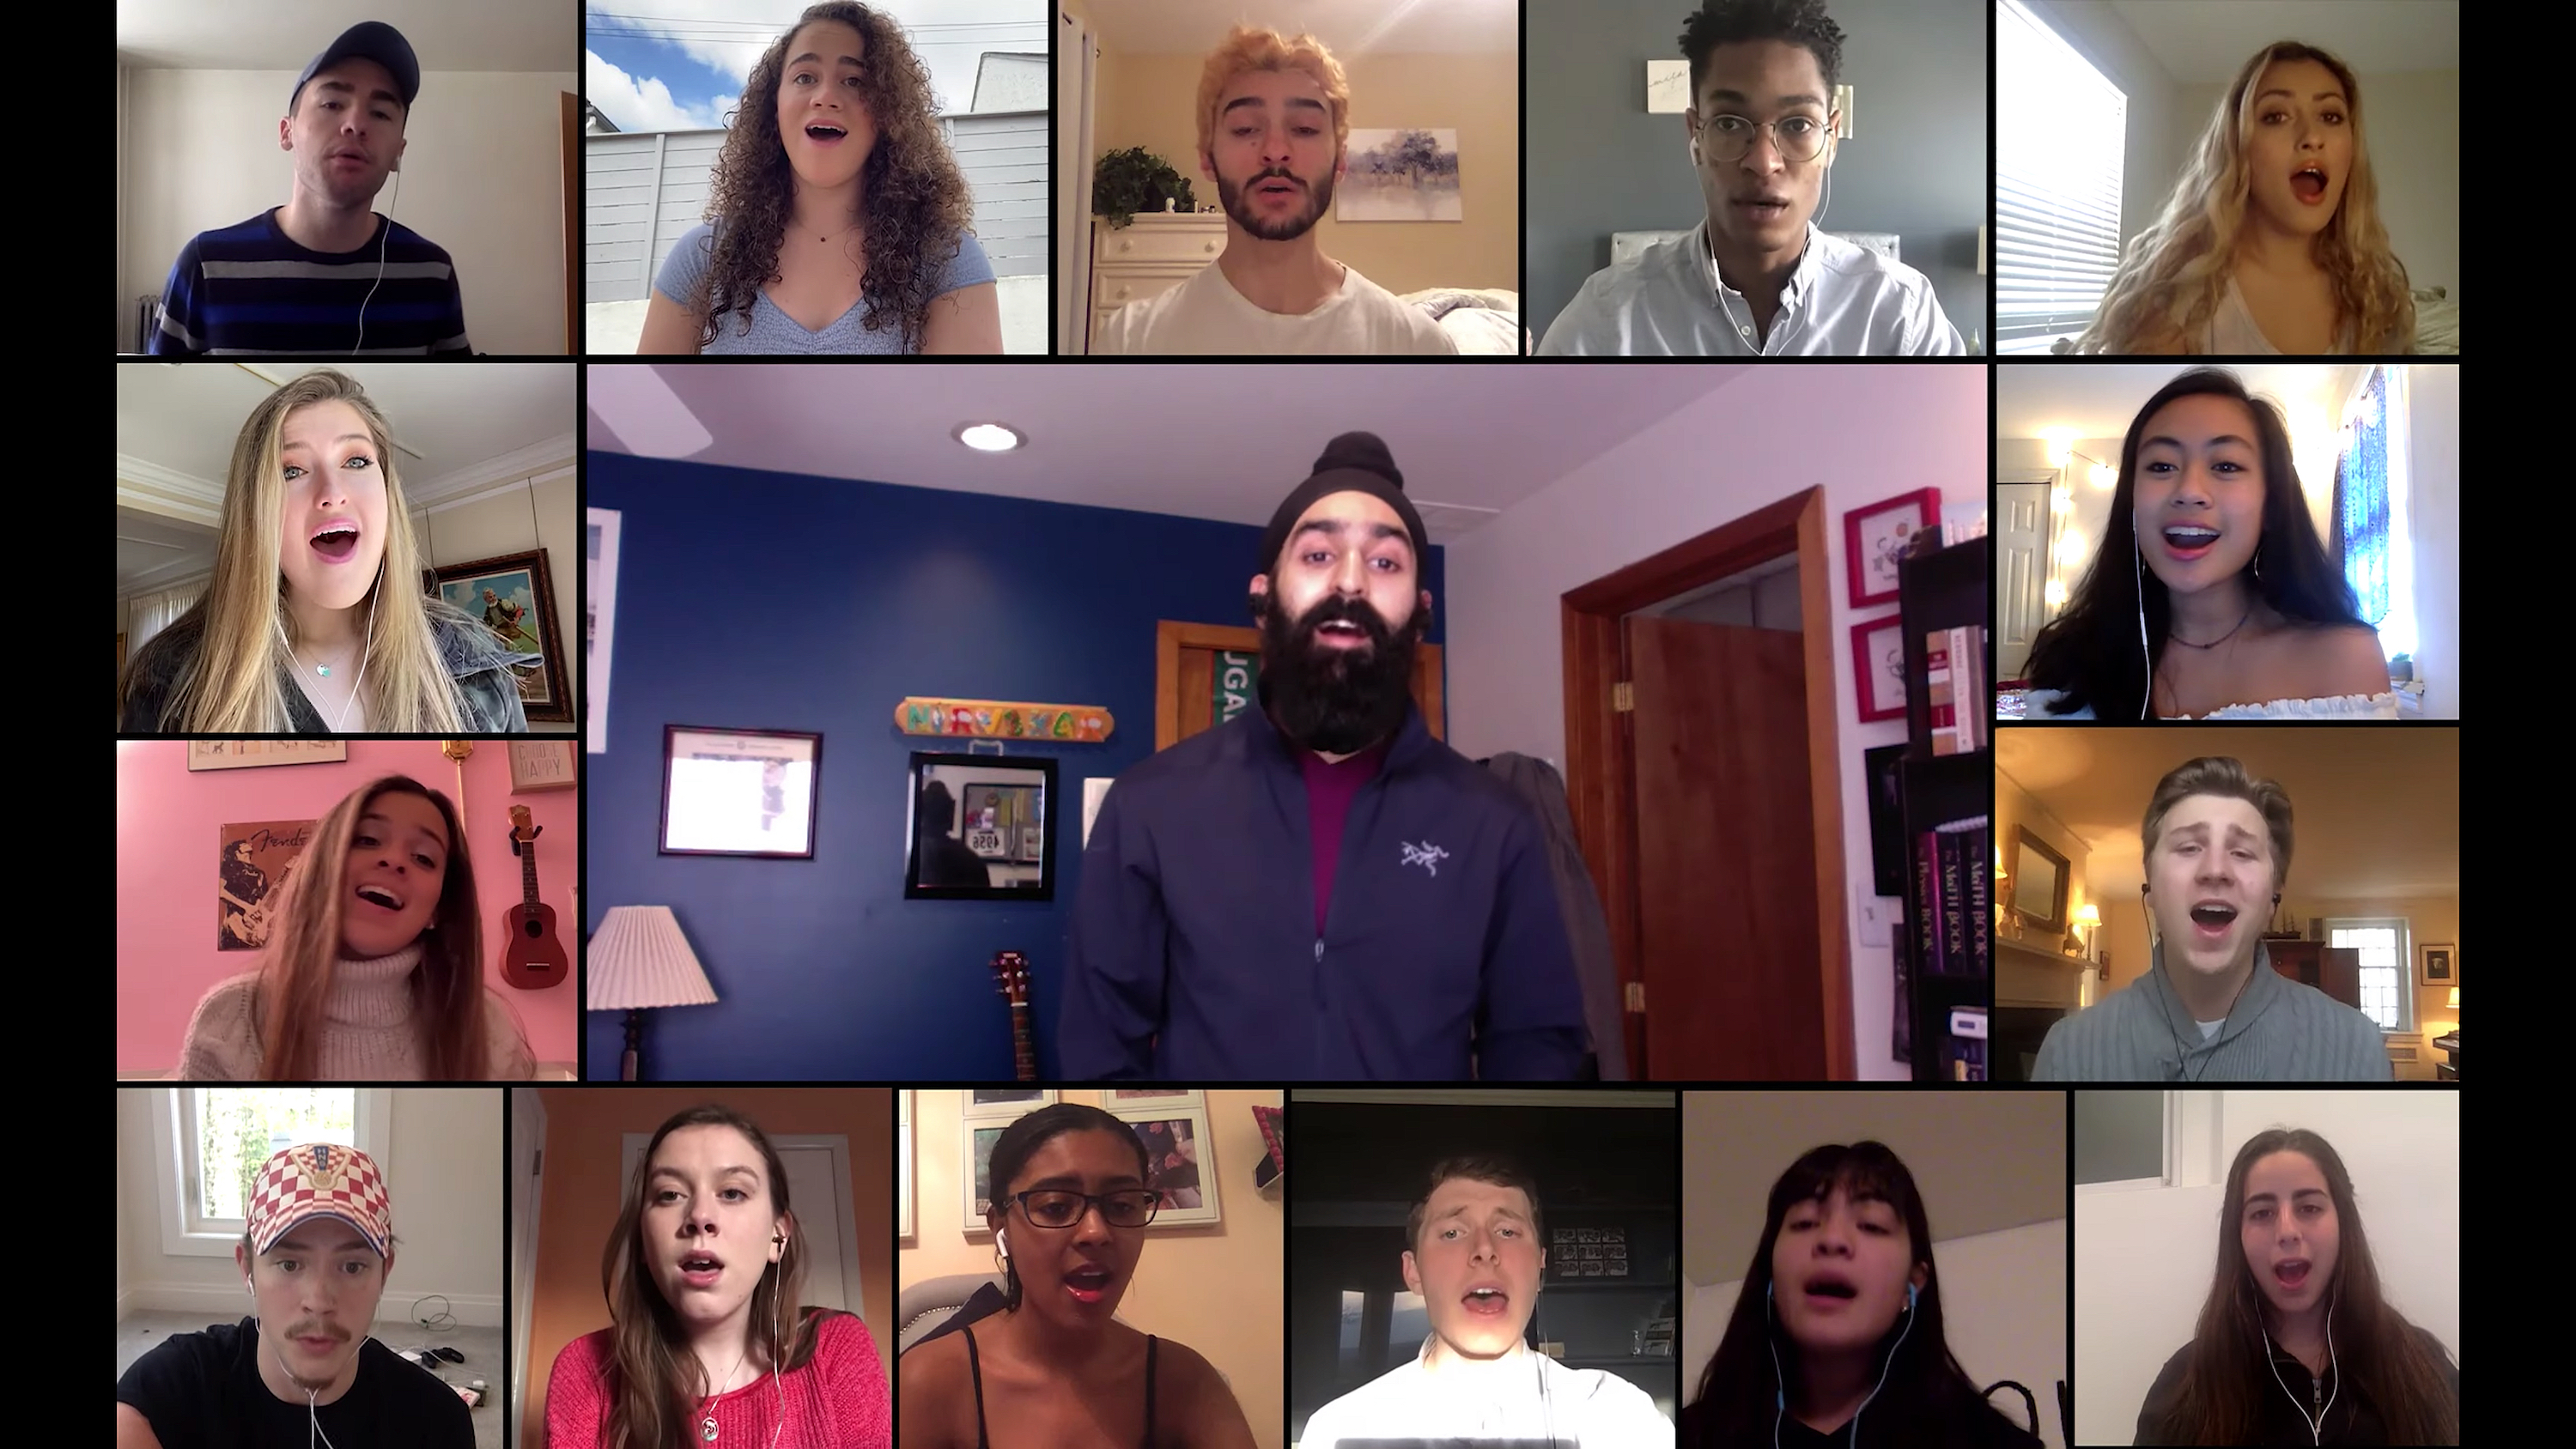 Sixteen students singing in a music video